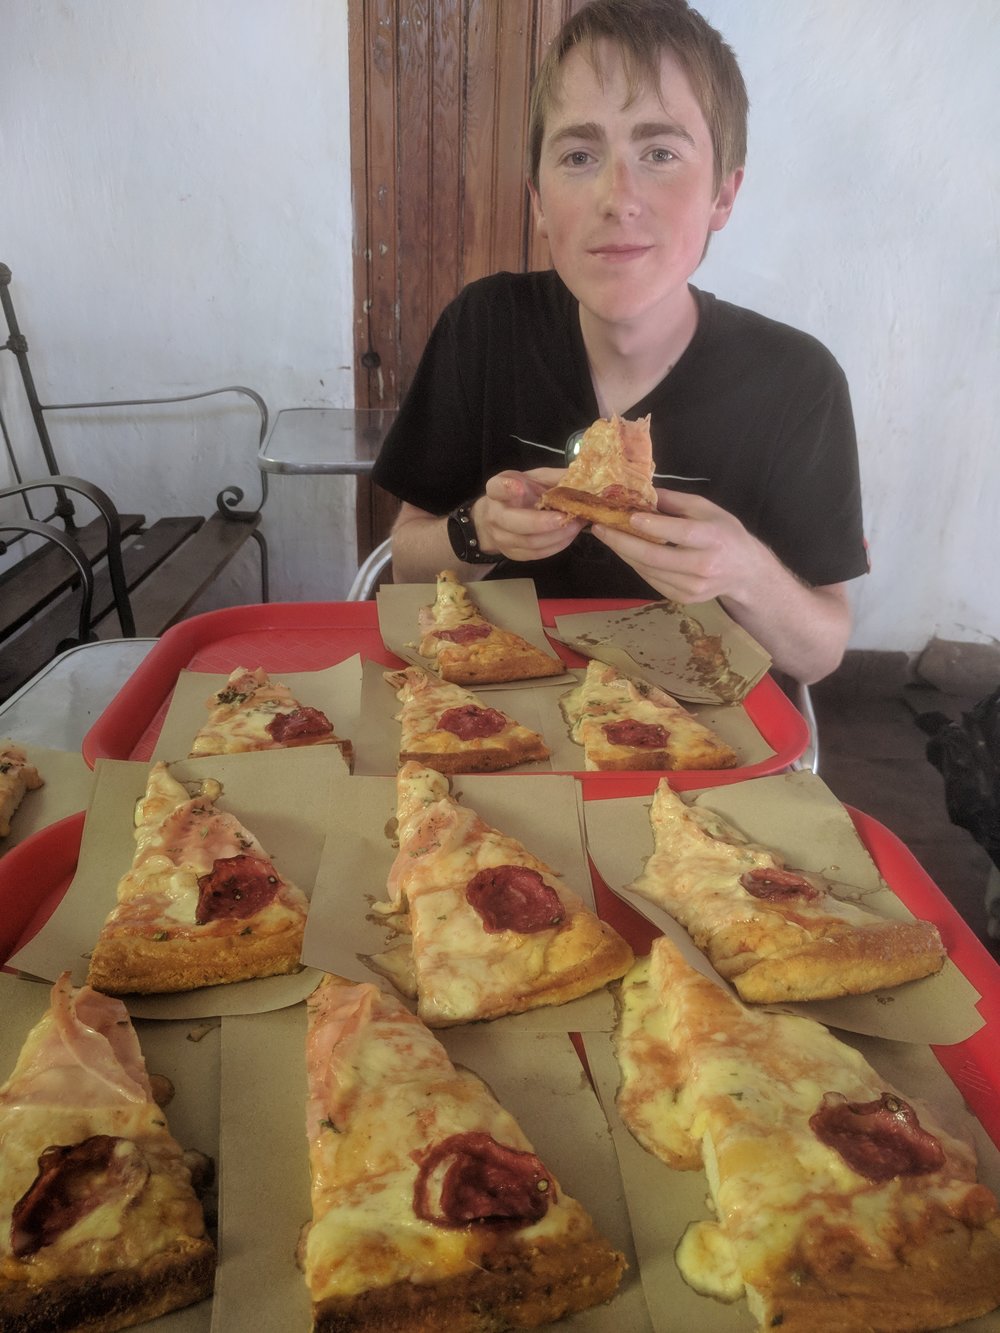 even the pizza was tasty...